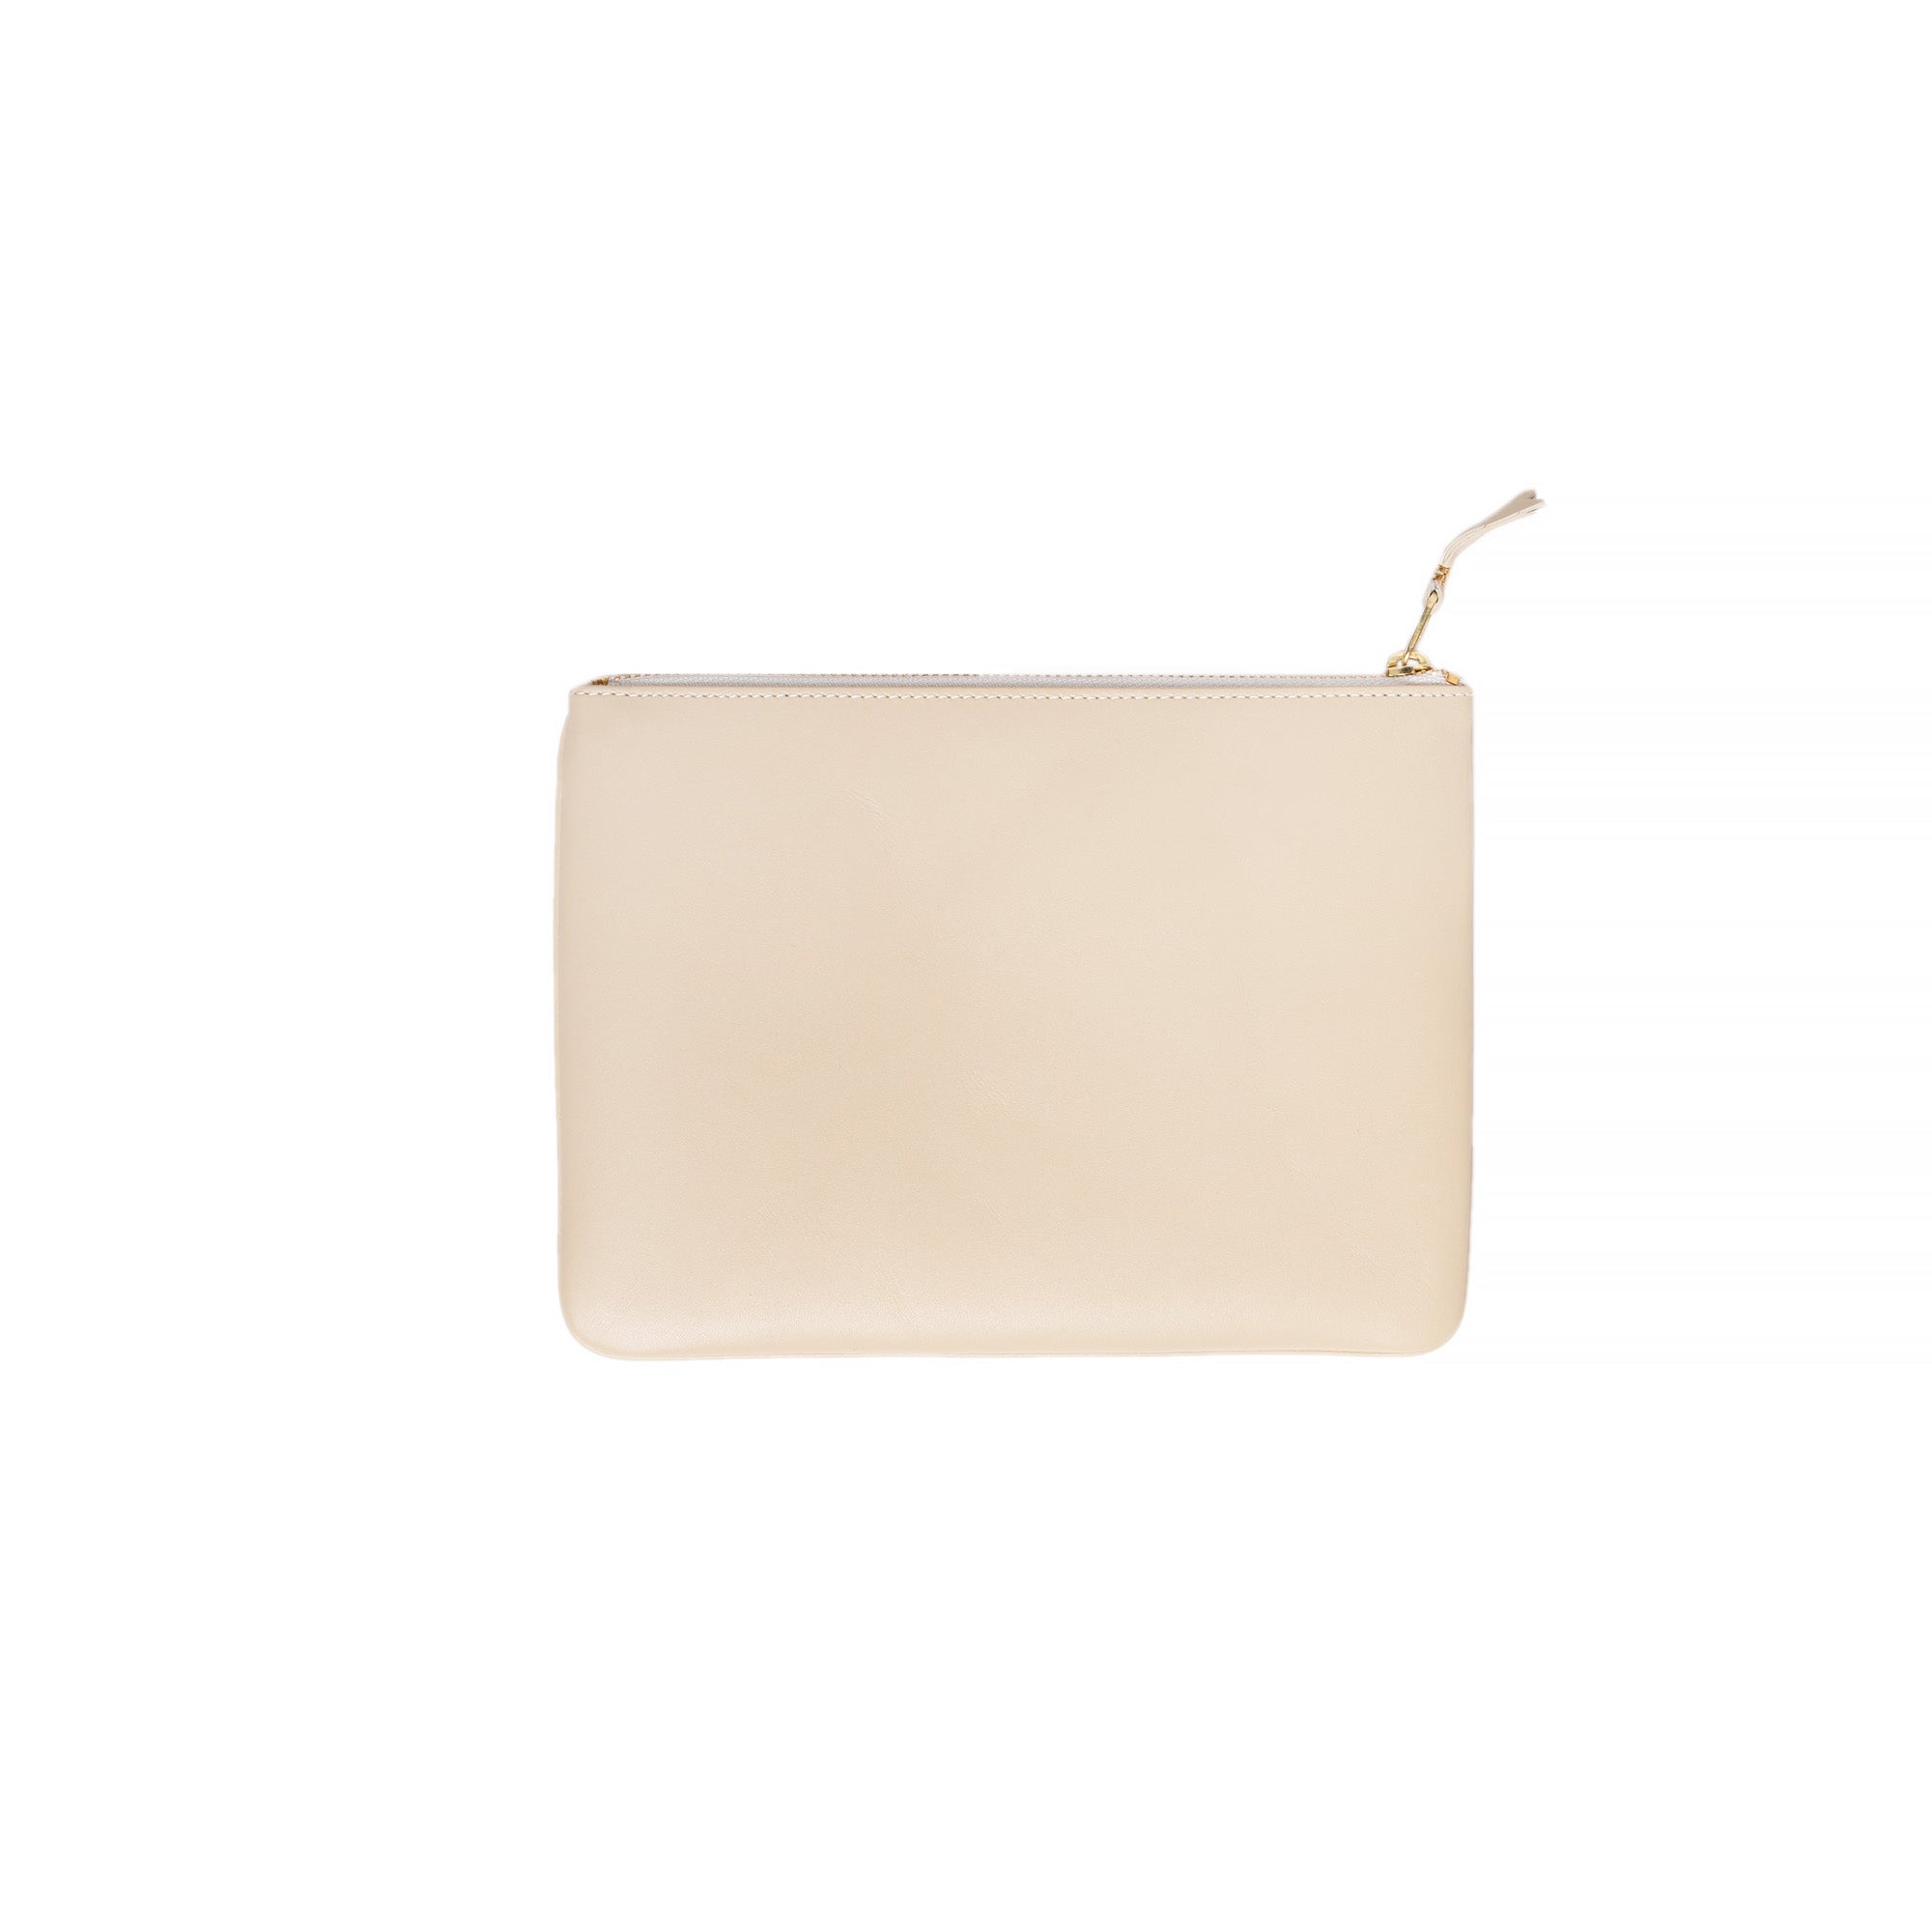 Comme Des Garcon Wallet: Classic Leather Line Clutch in White